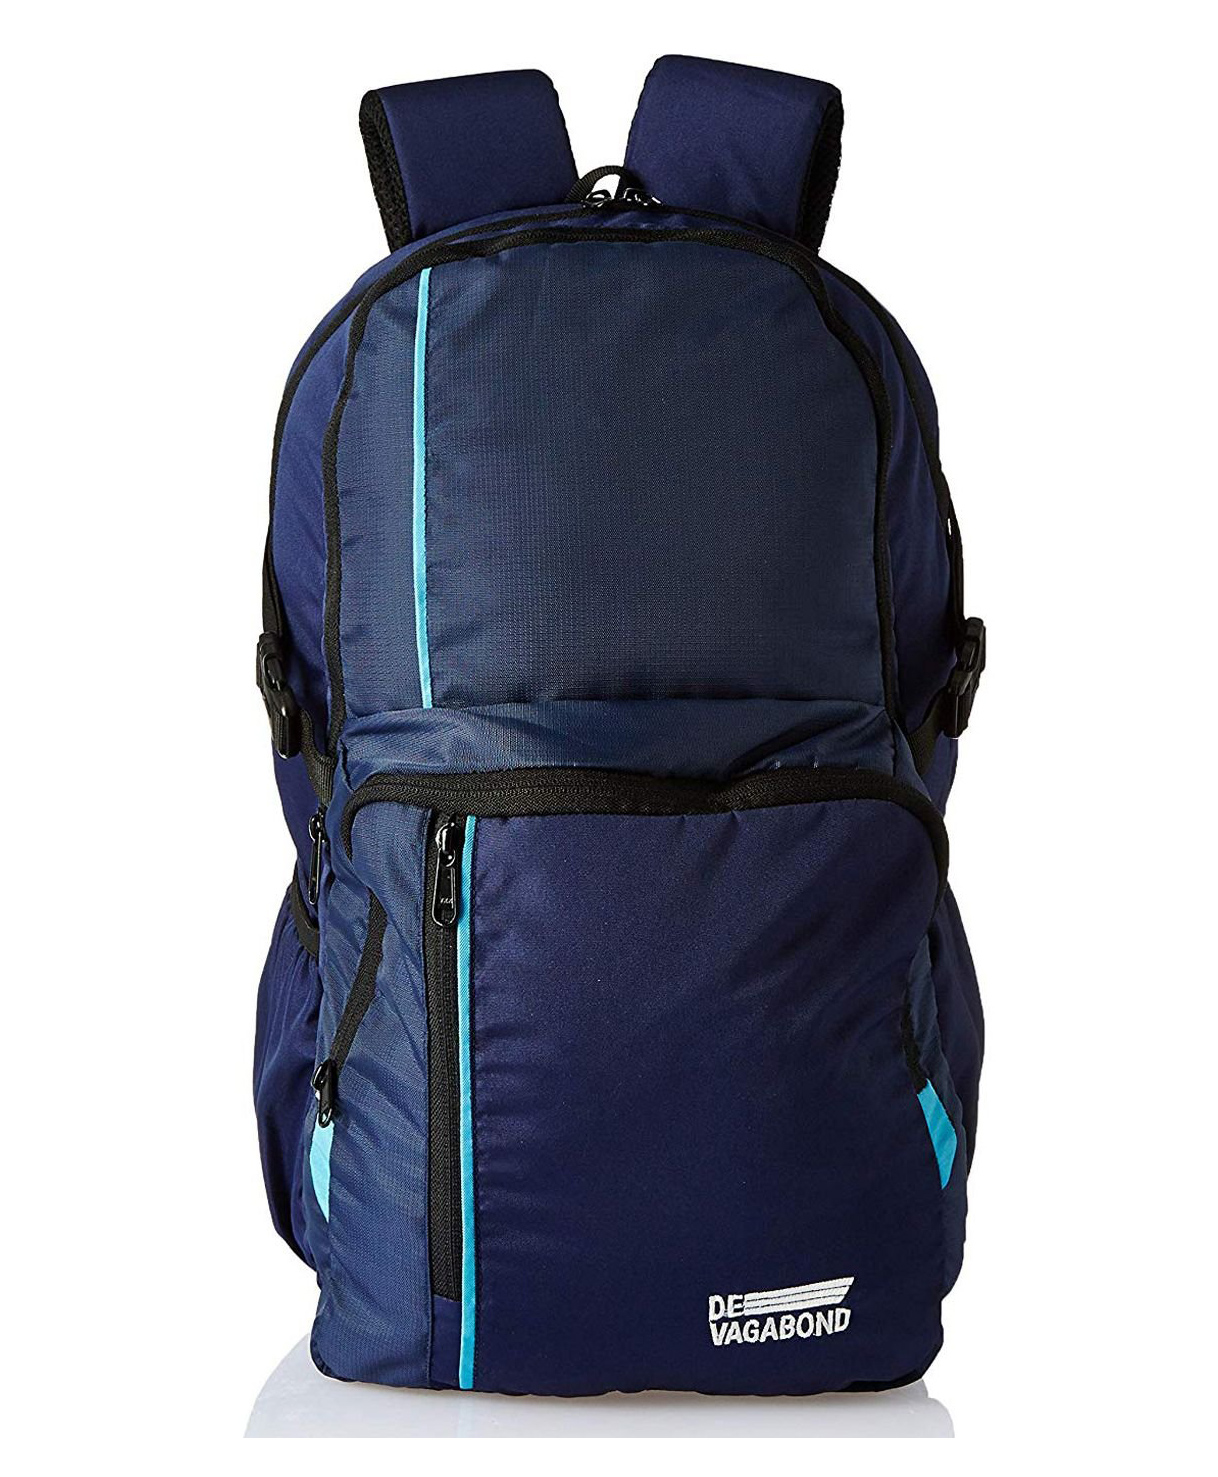 De Vagabond Backpack Blue - 19 inches Online in India, Buy at Best Price from FirstCry.com -